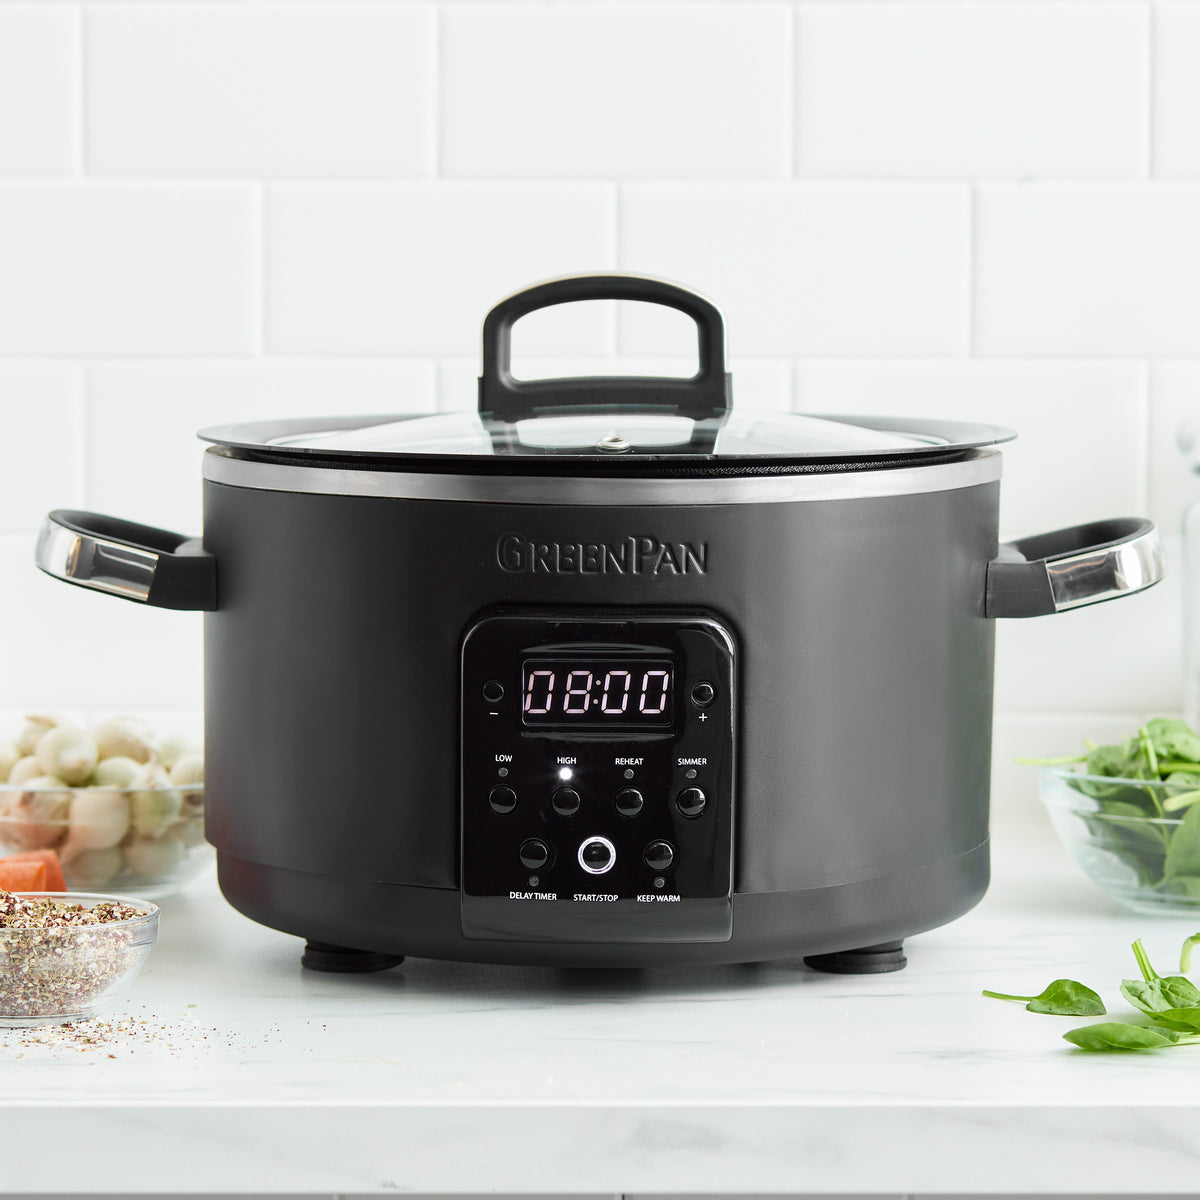 4 Qt. Digital Stainless Steel Slow Cooker